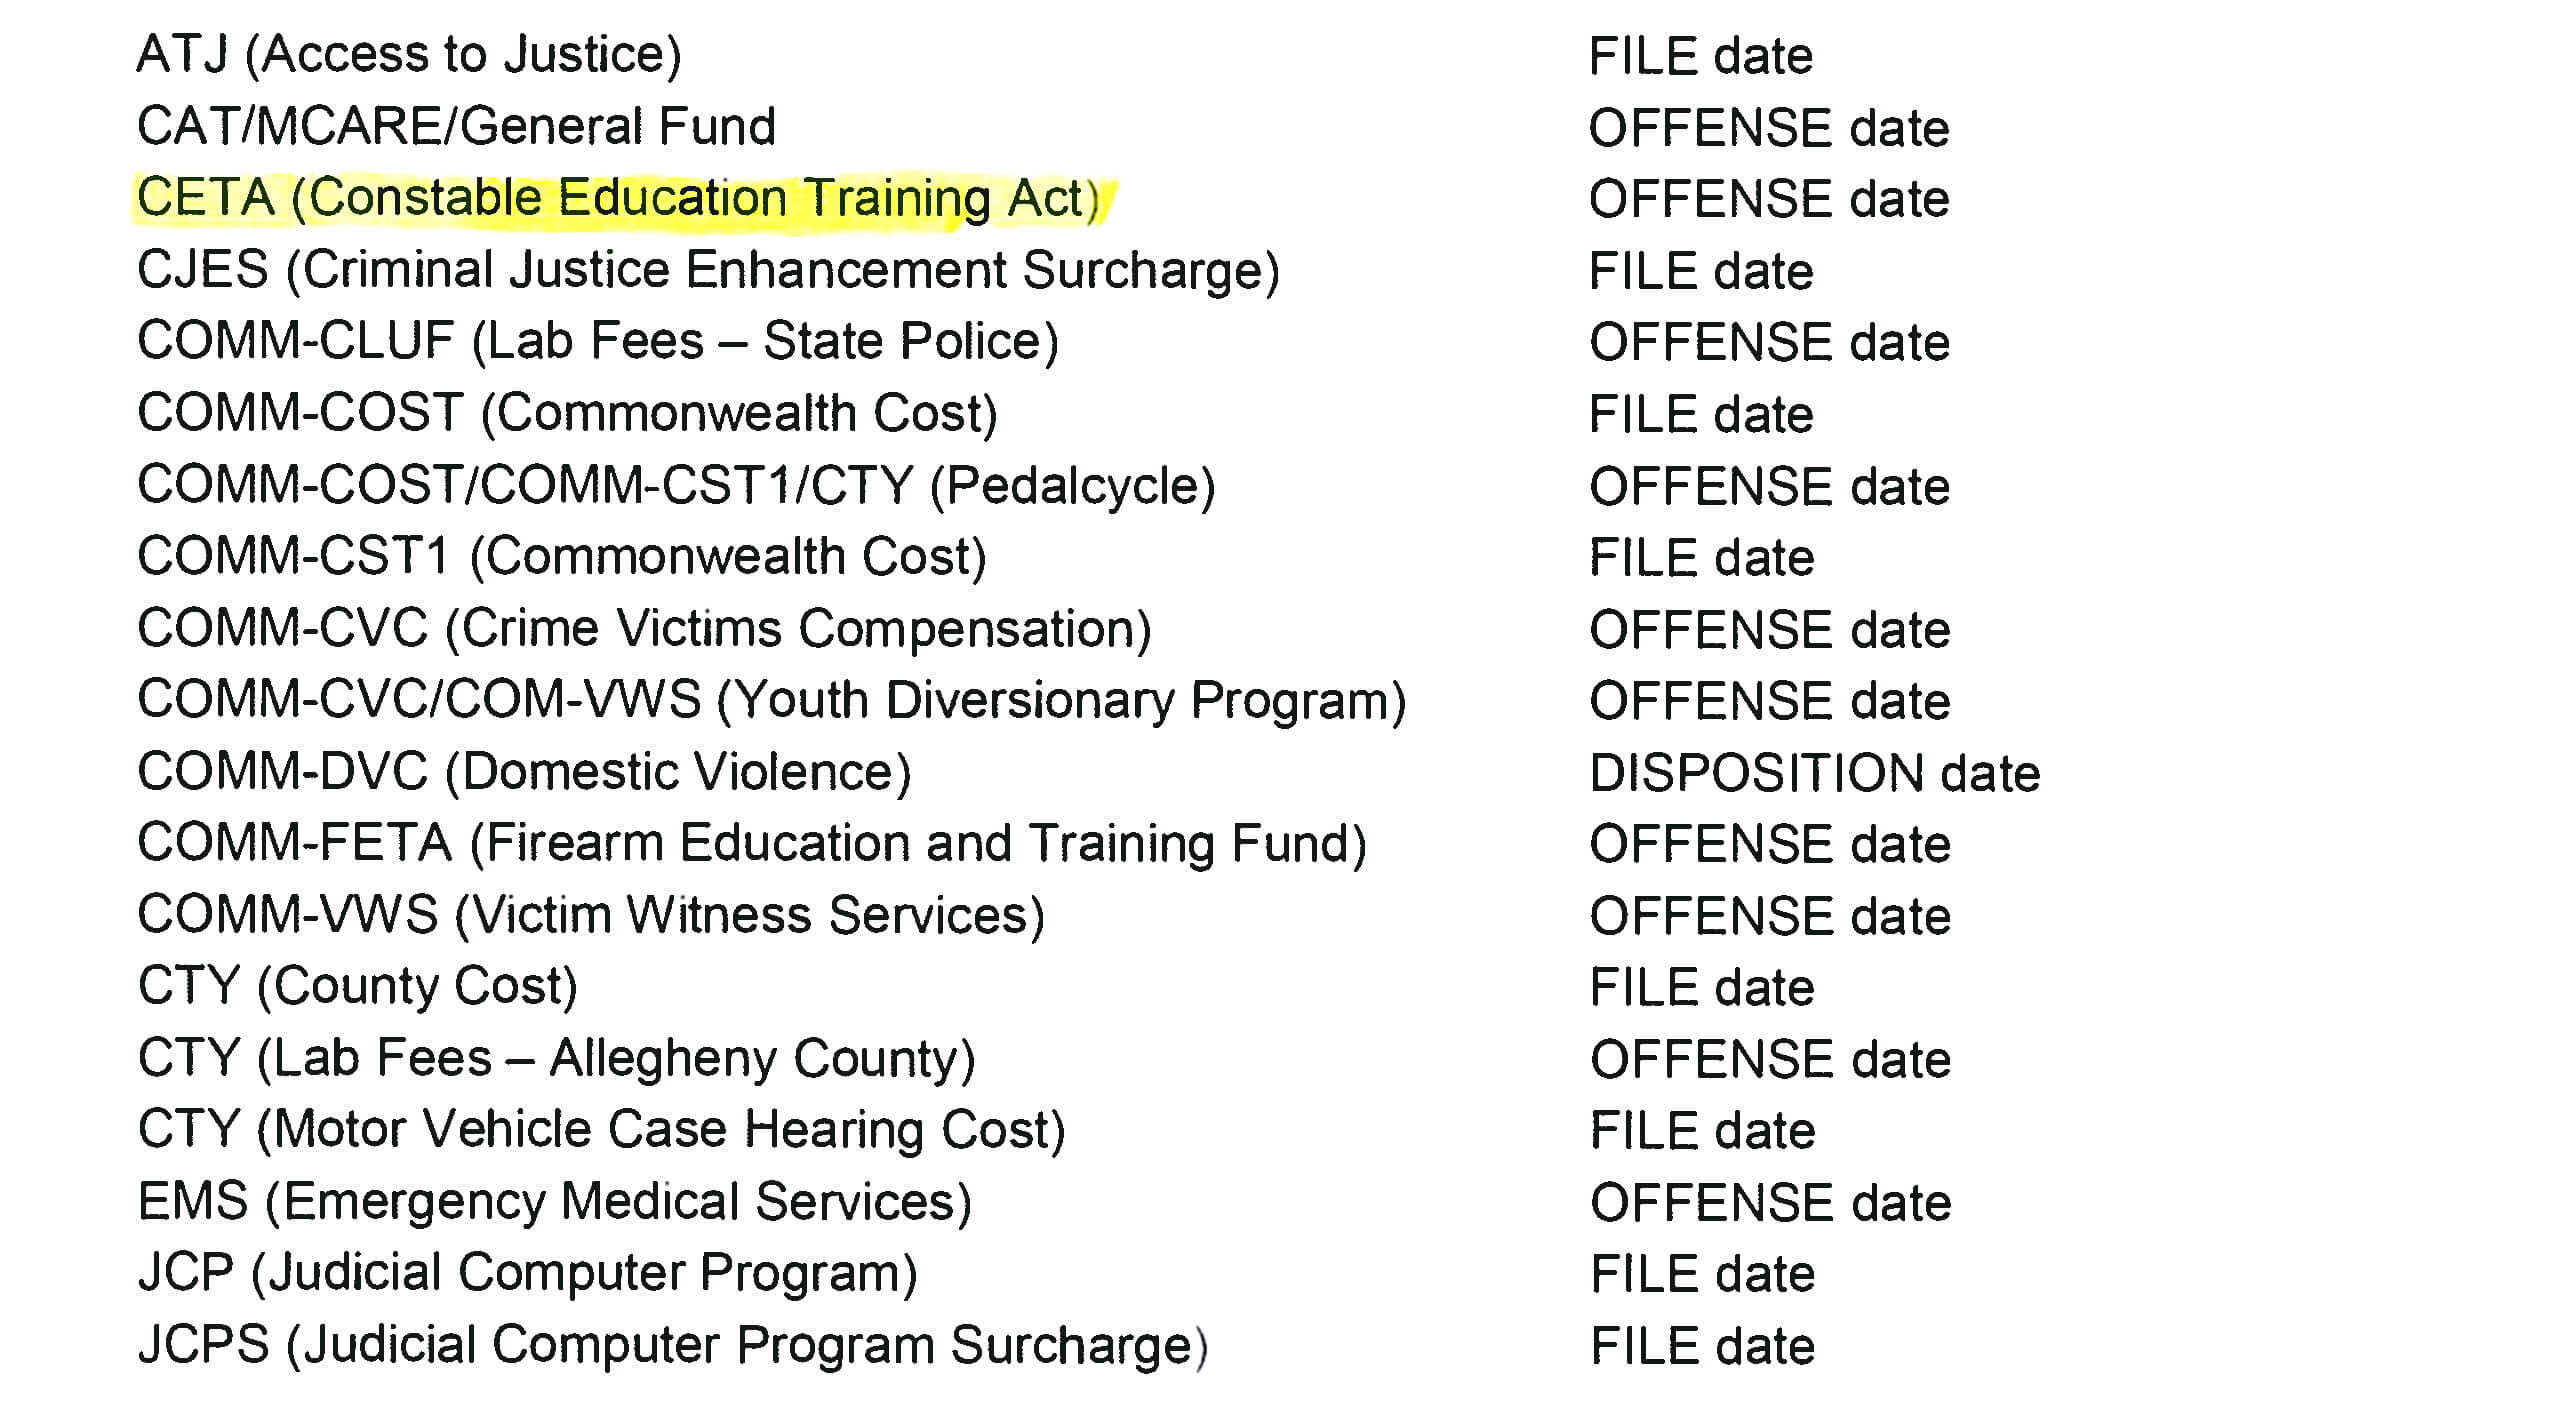 Constable Education Training Act funds basic training and certification for constables across Pennsylvania.